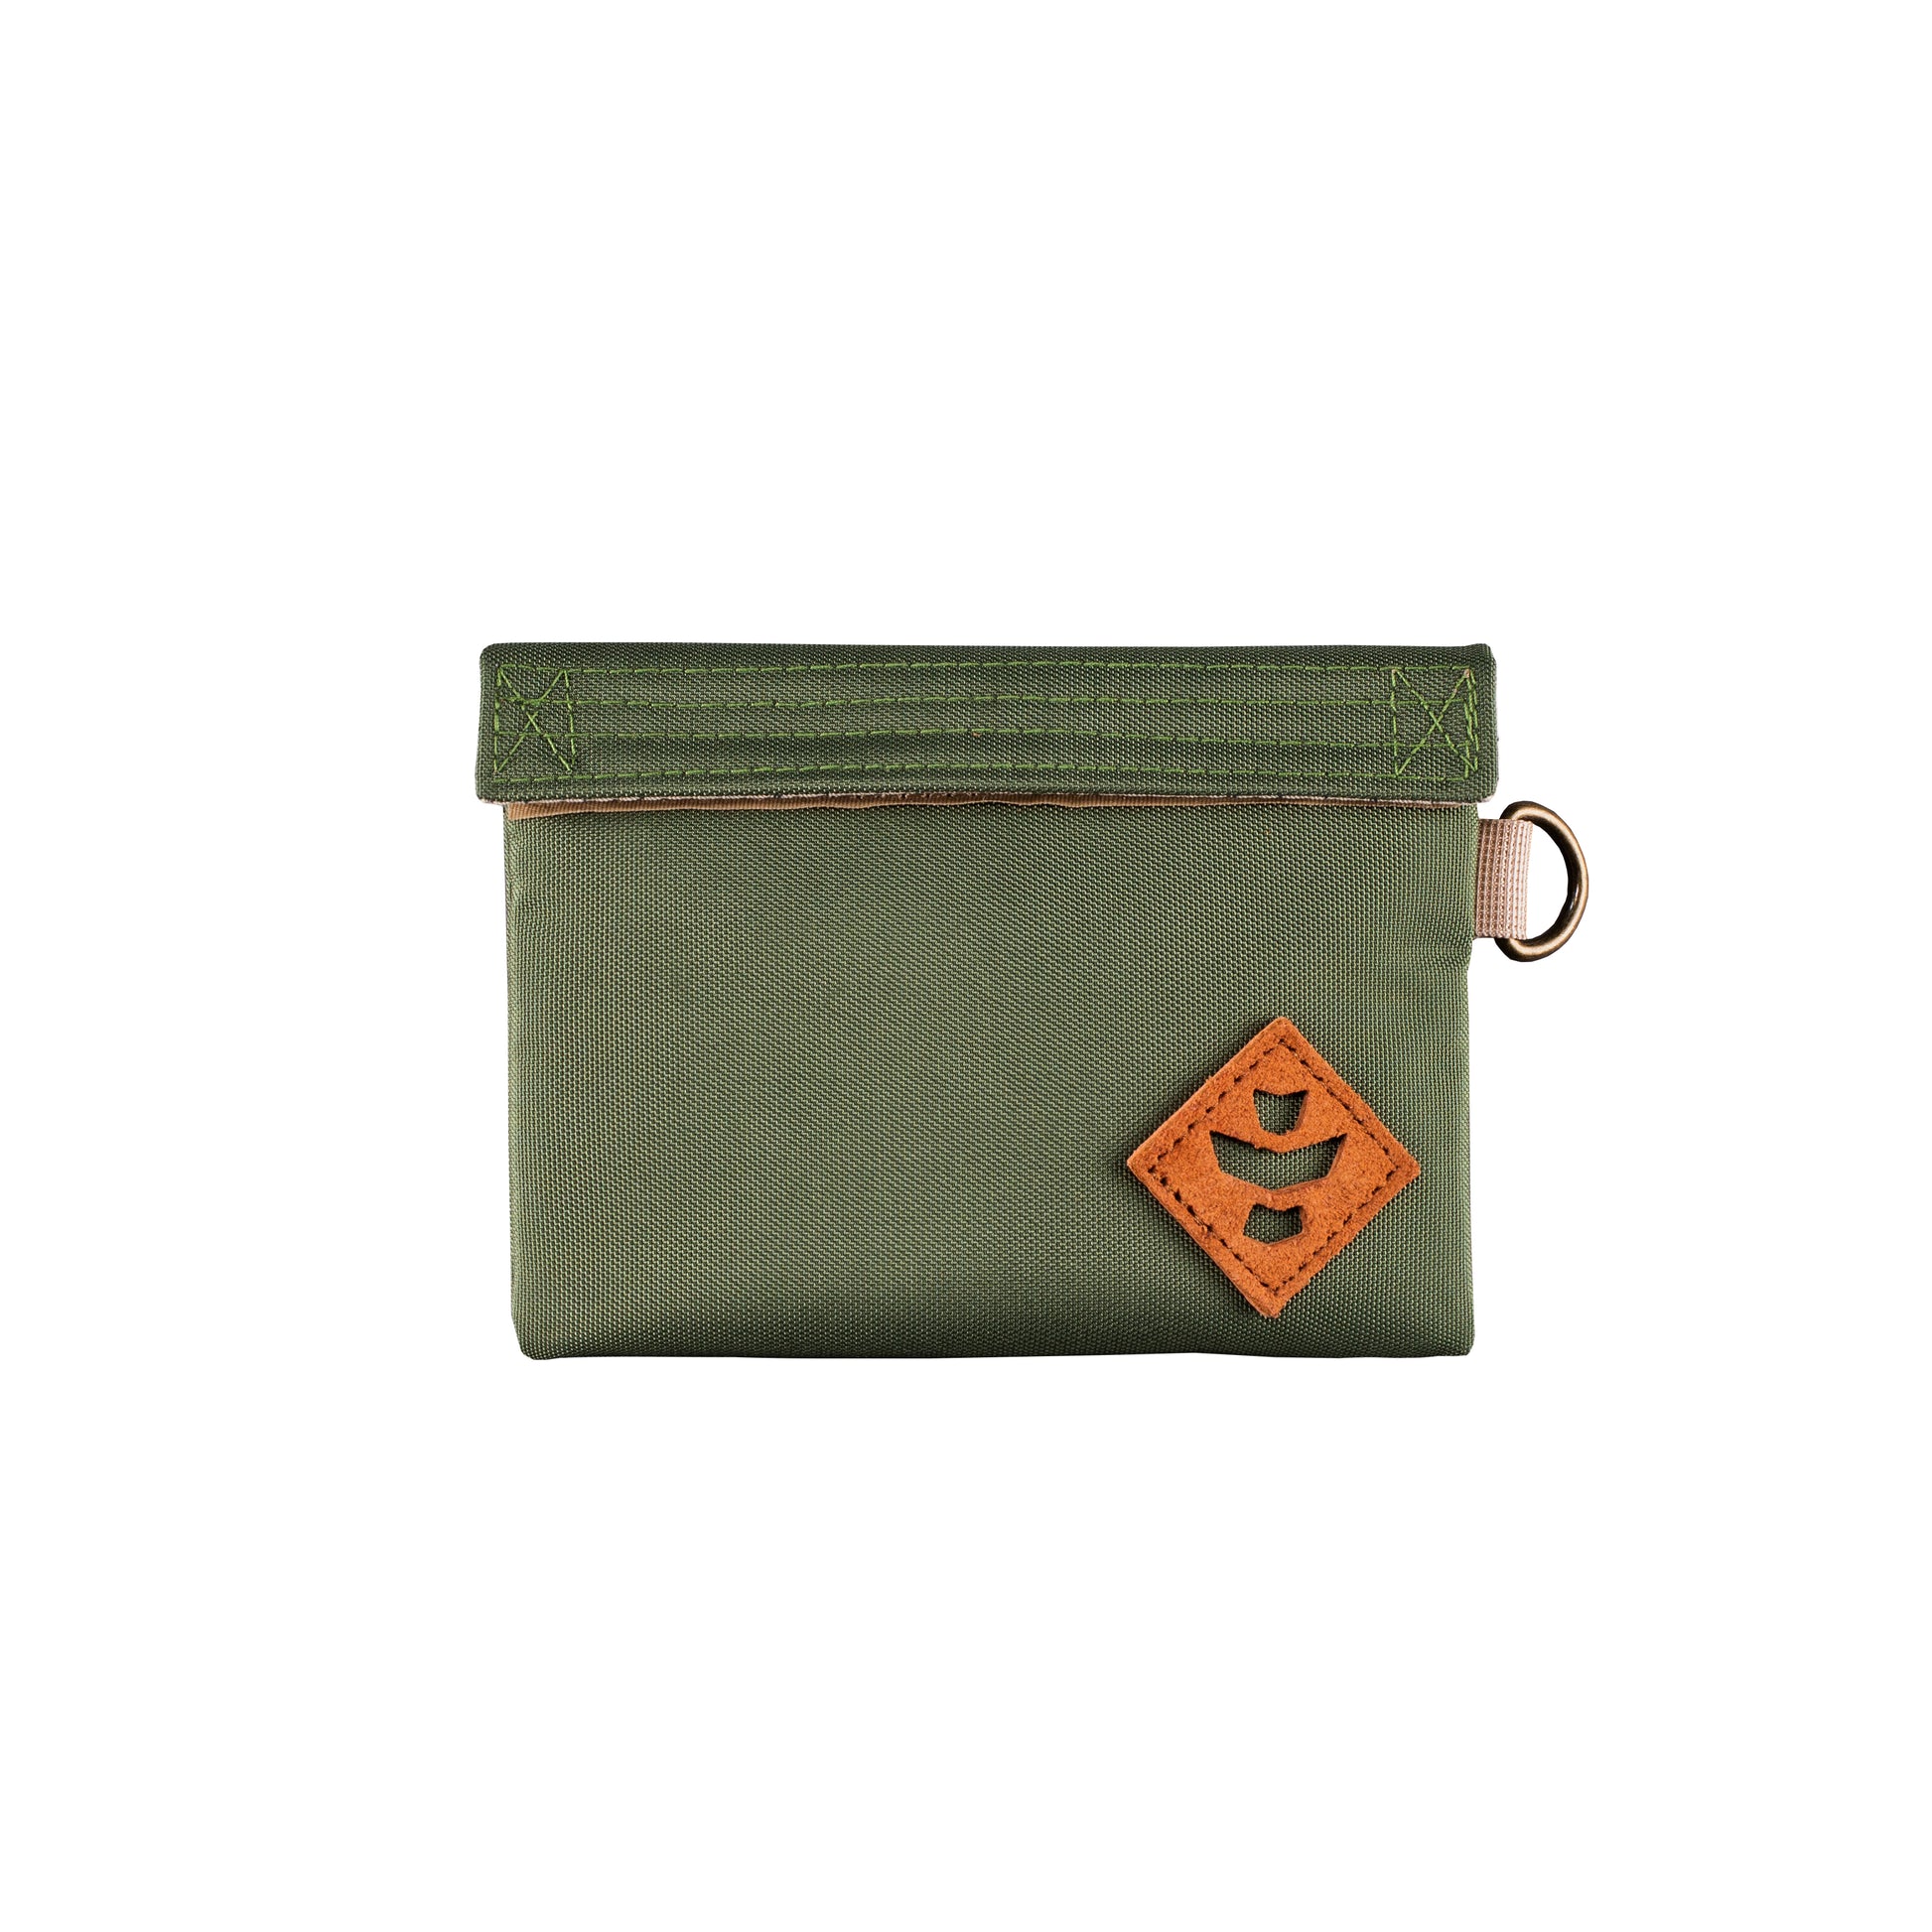 Revelry Mini Confidant Luggage and Travel Products : Travel Bag Revelry Supply Green  